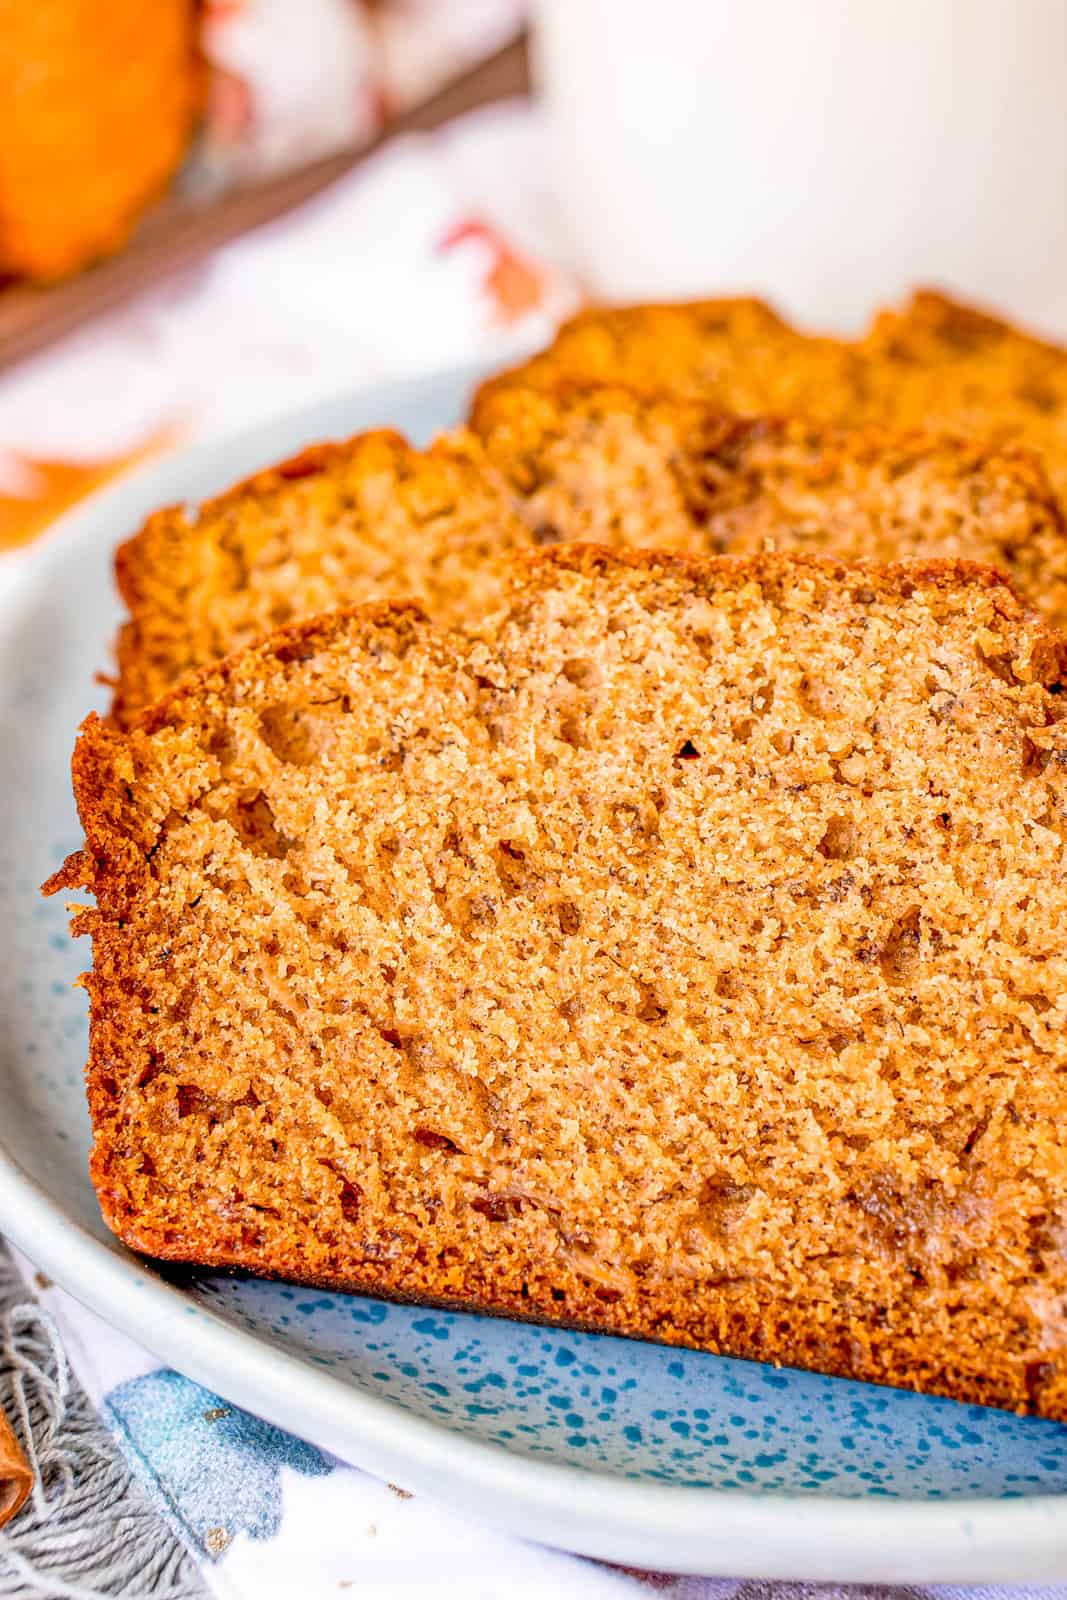 Close up of slice of Pumpkin Banana Bread on plate.